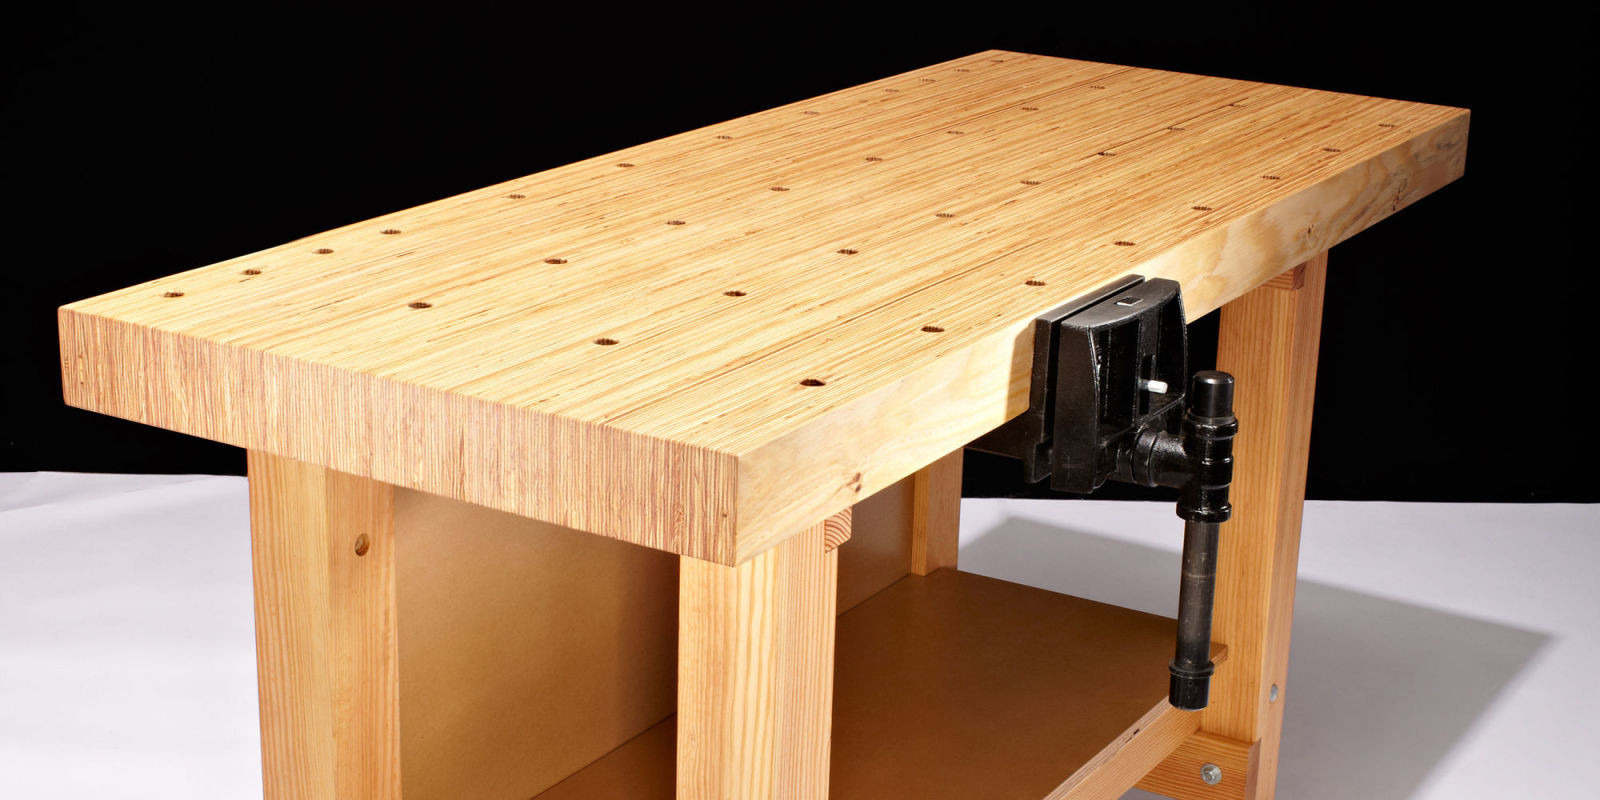 Wood Workbench DIY
 How to Build This DIY Workbench